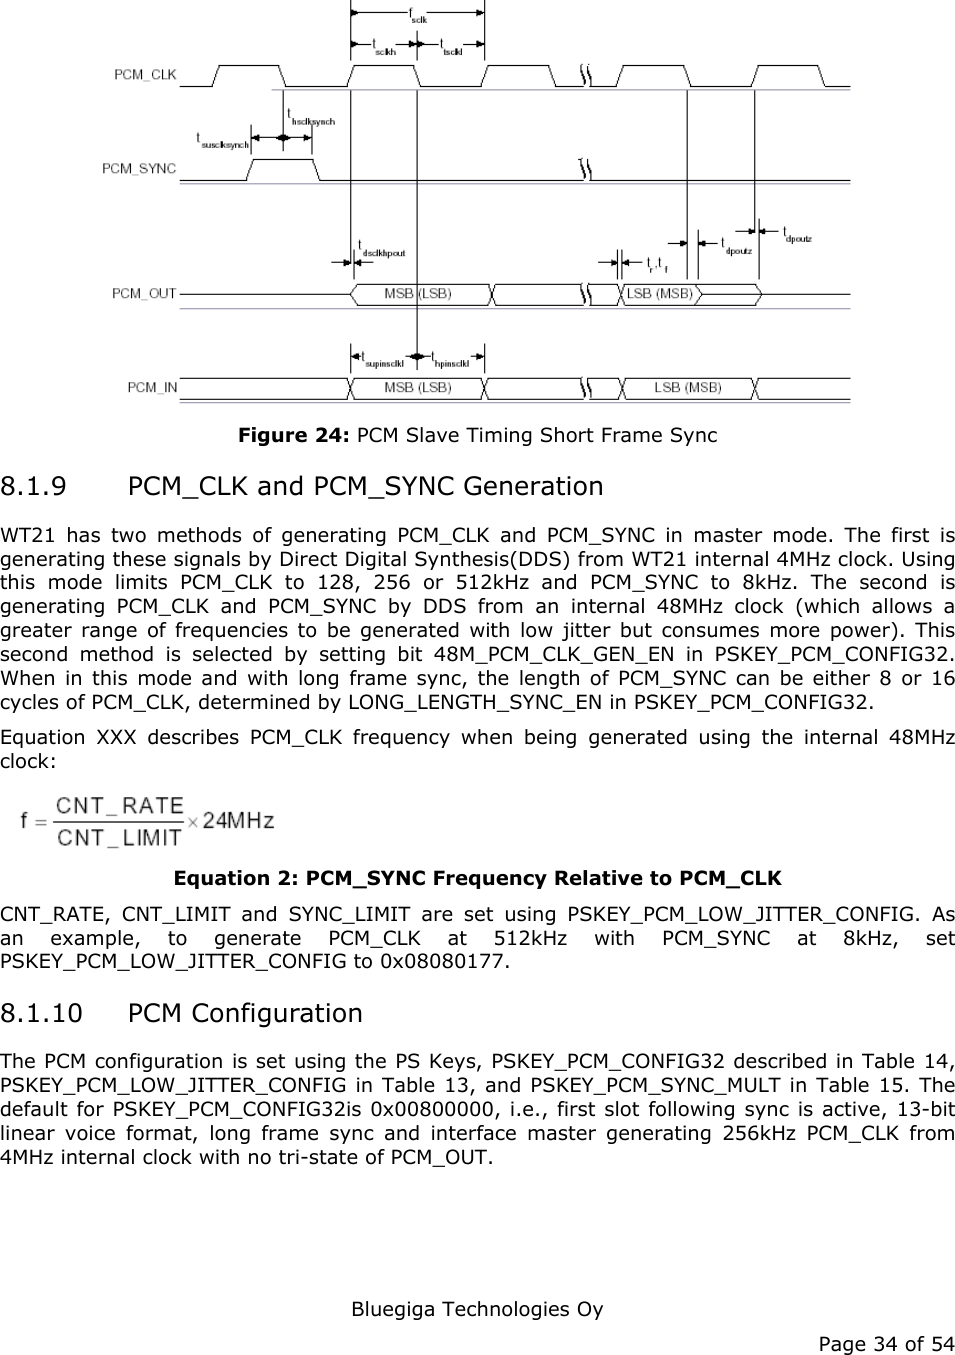   Bluegiga Technologies Oy Page 34 of 54  Figure 24: PCM Slave Timing Short Frame Sync 8.1.9 PCM_CLK and PCM_SYNC Generation WT21 has two methods of generating PCM_CLK and PCM_SYNC in master mode. The first is generating these signals by Direct Digital Synthesis(DDS) from WT21 internal 4MHz clock. Using this mode limits PCM_CLK to 128, 256 or 512kHz and PCM_SYNC to 8kHz. The second is generating PCM_CLK and PCM_SYNC by DDS from an internal 48MHz clock (which allows a greater range of frequencies to be generated with low jitter but consumes more power). This second method is selected by setting bit 48M_PCM_CLK_GEN_EN in PSKEY_PCM_CONFIG32. When in this mode and with long frame sync, the length of PCM_SYNC can be either 8 or 16 cycles of PCM_CLK, determined by LONG_LENGTH_SYNC_EN in PSKEY_PCM_CONFIG32. Equation XXX describes PCM_CLK frequency when being generated using the internal 48MHz clock:  Equation 2: PCM_SYNC Frequency Relative to PCM_CLK CNT_RATE, CNT_LIMIT and SYNC_LIMIT are set using PSKEY_PCM_LOW_JITTER_CONFIG. As an example, to generate PCM_CLK at 512kHz with PCM_SYNC at 8kHz, set PSKEY_PCM_LOW_JITTER_CONFIG to 0x08080177. 8.1.10 PCM Configuration The PCM configuration is set using the PS Keys, PSKEY_PCM_CONFIG32 described in Table 14, PSKEY_PCM_LOW_JITTER_CONFIG in Table 13, and PSKEY_PCM_SYNC_MULT in Table 15. The default for PSKEY_PCM_CONFIG32is 0x00800000, i.e., first slot following sync is active, 13-bit linear voice format, long frame sync and interface master generating 256kHz PCM_CLK from 4MHz internal clock with no tri-state of PCM_OUT. 